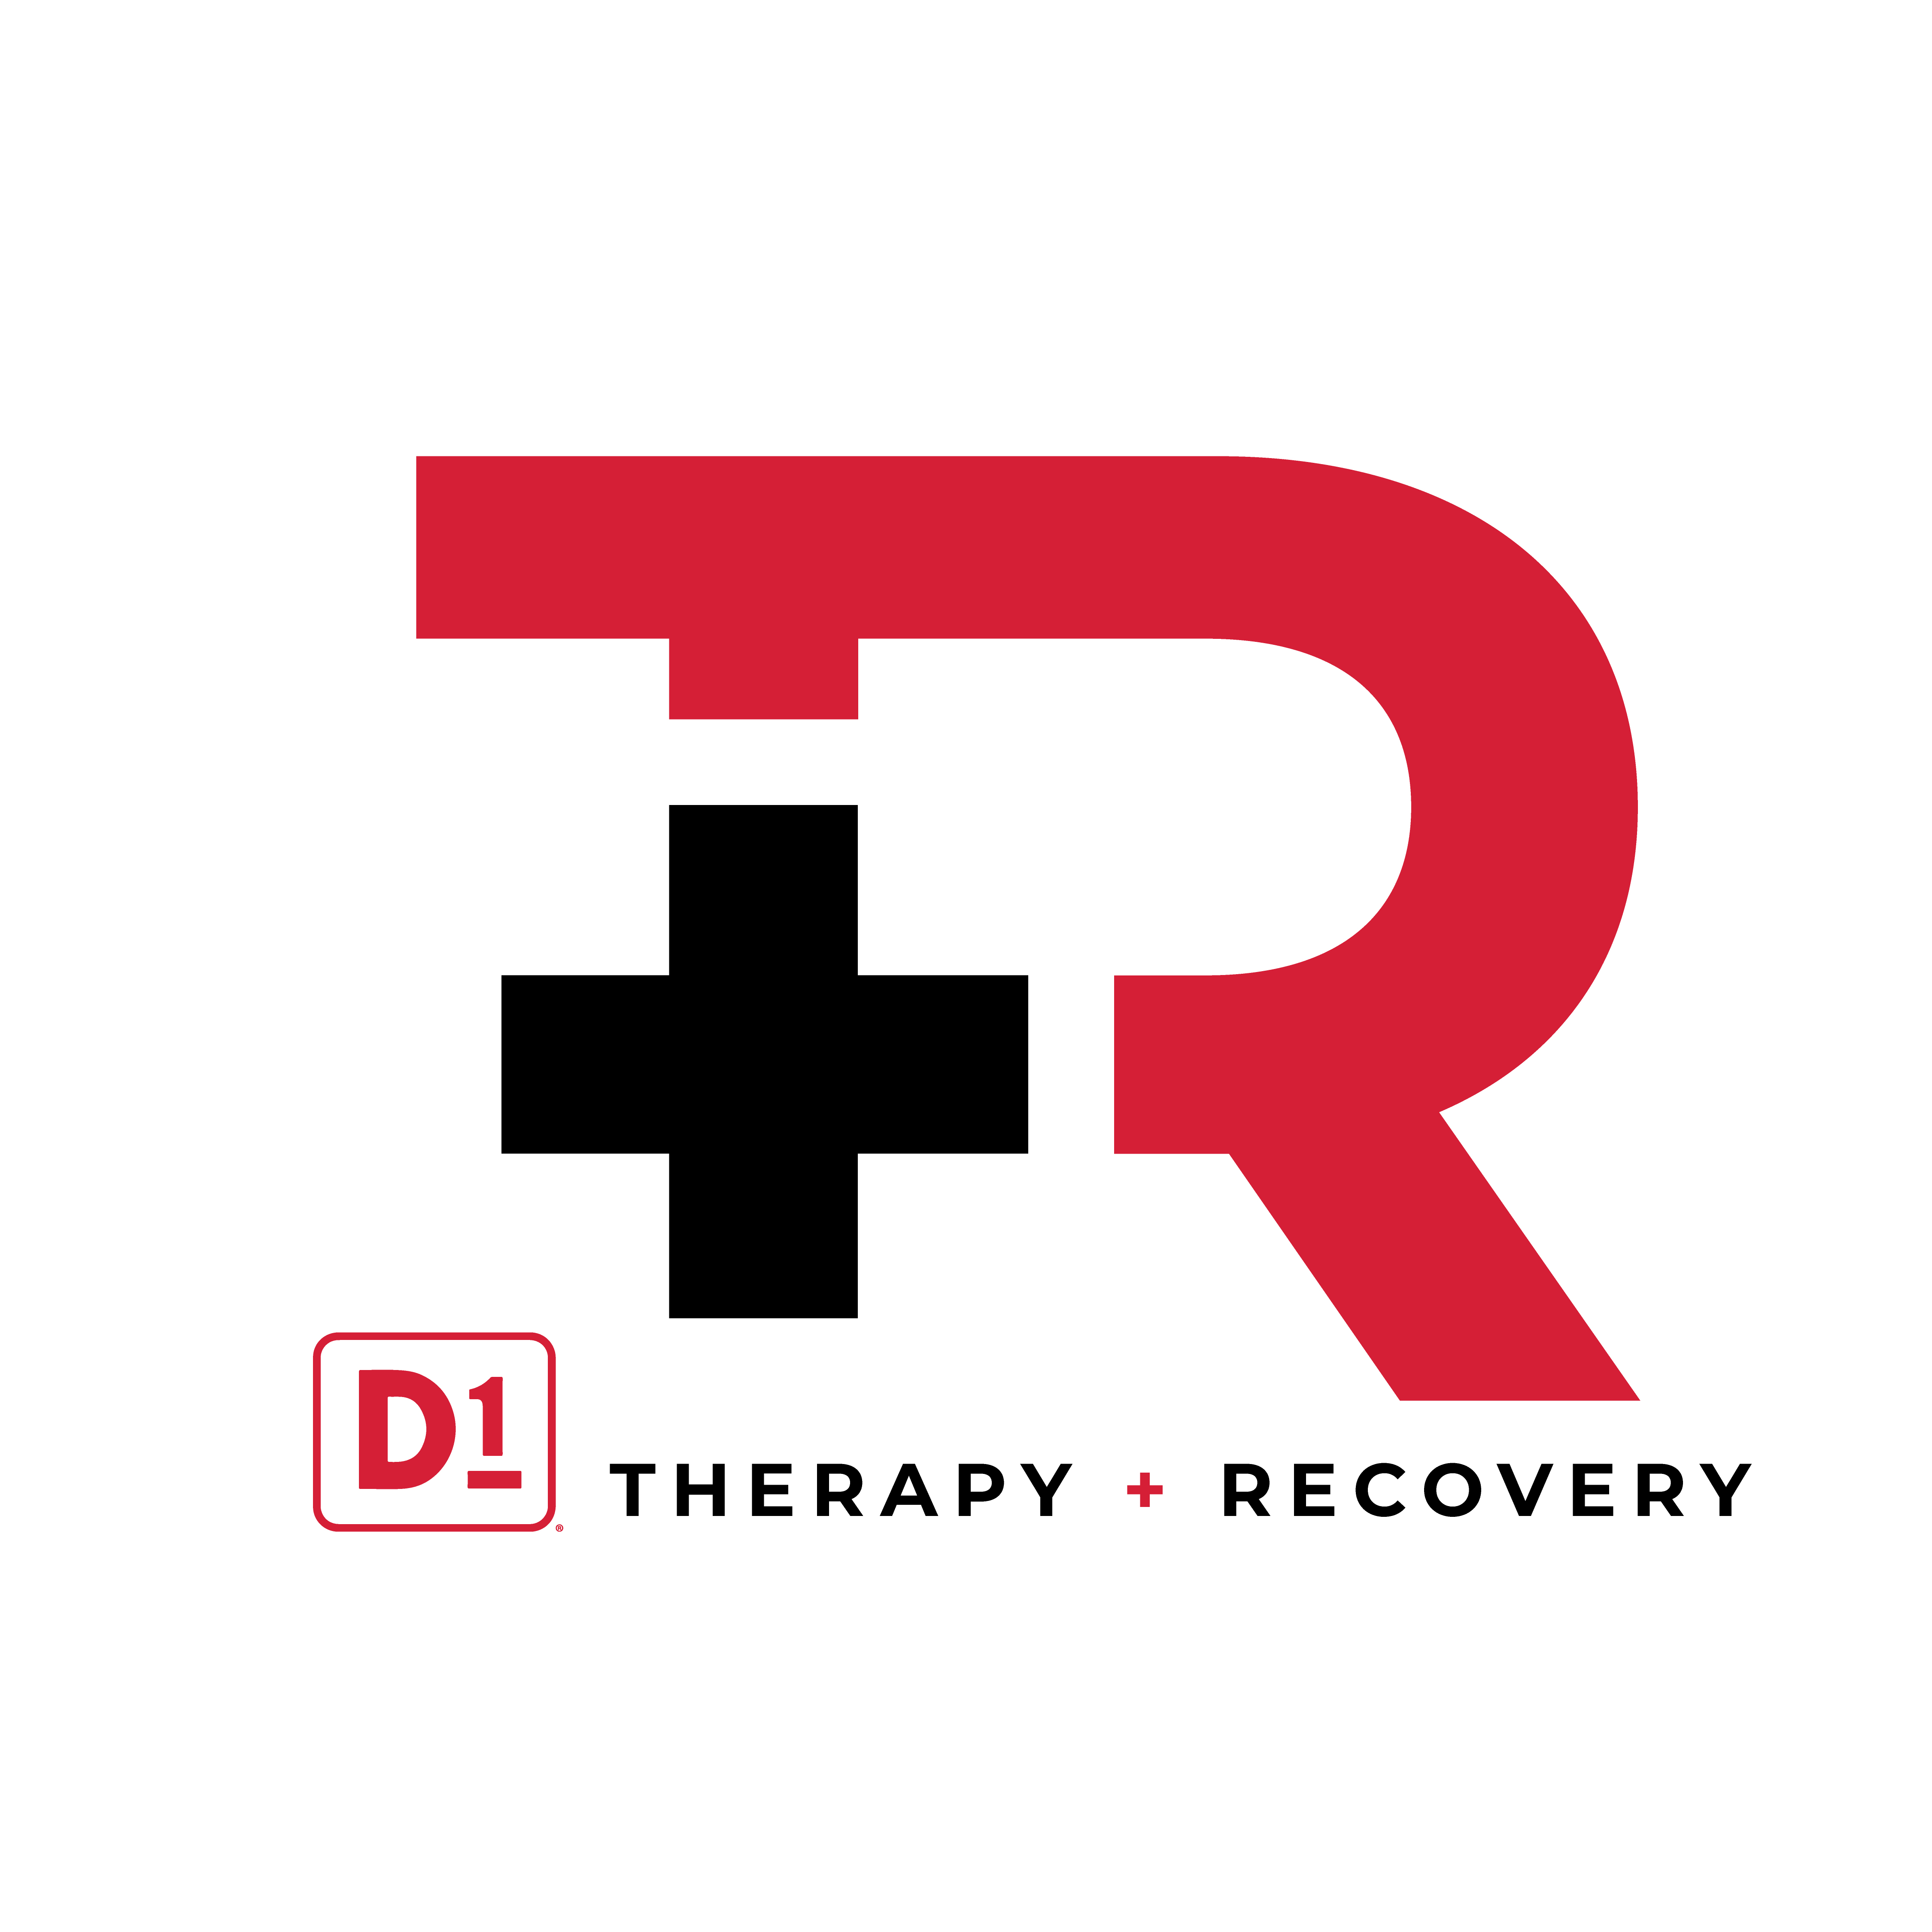 D1 1 therapy and recovery